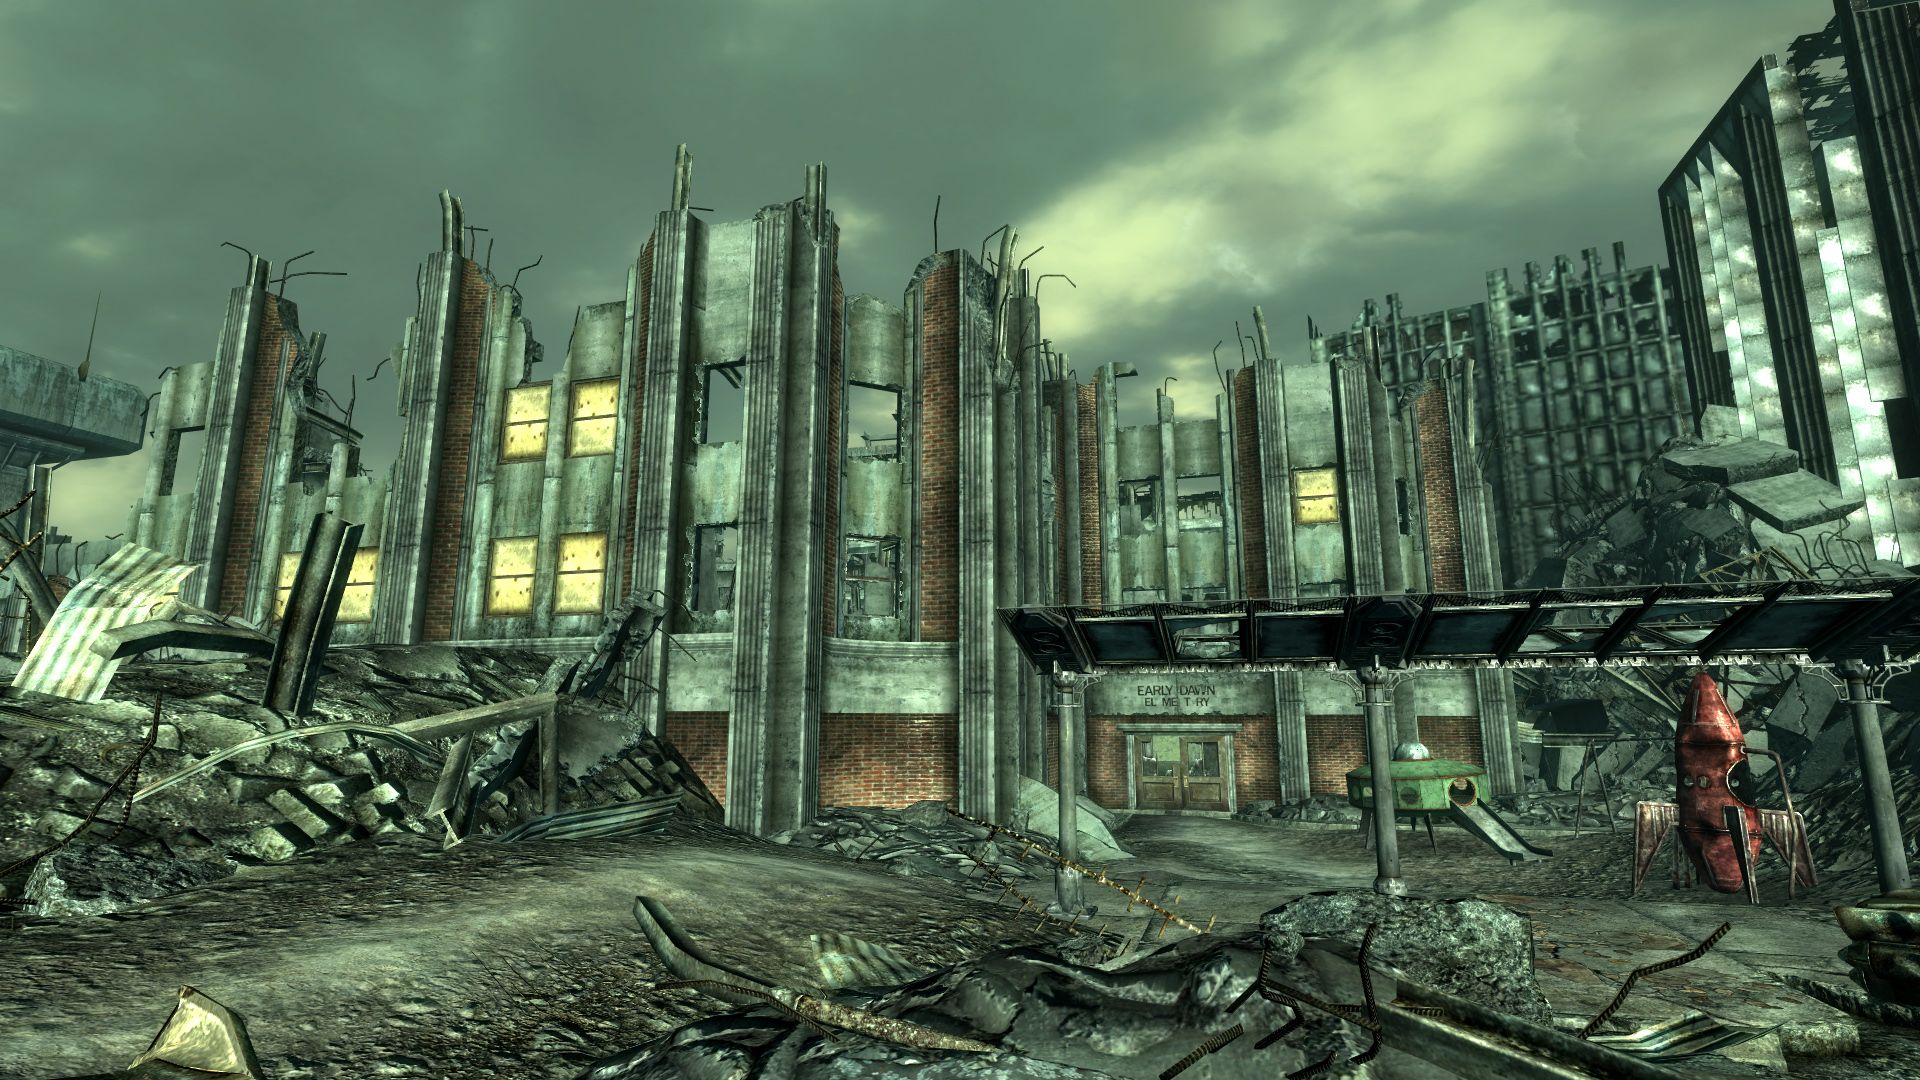 25 Hidden Locations In Fallout 3 Even Super Fans Haven’t Found